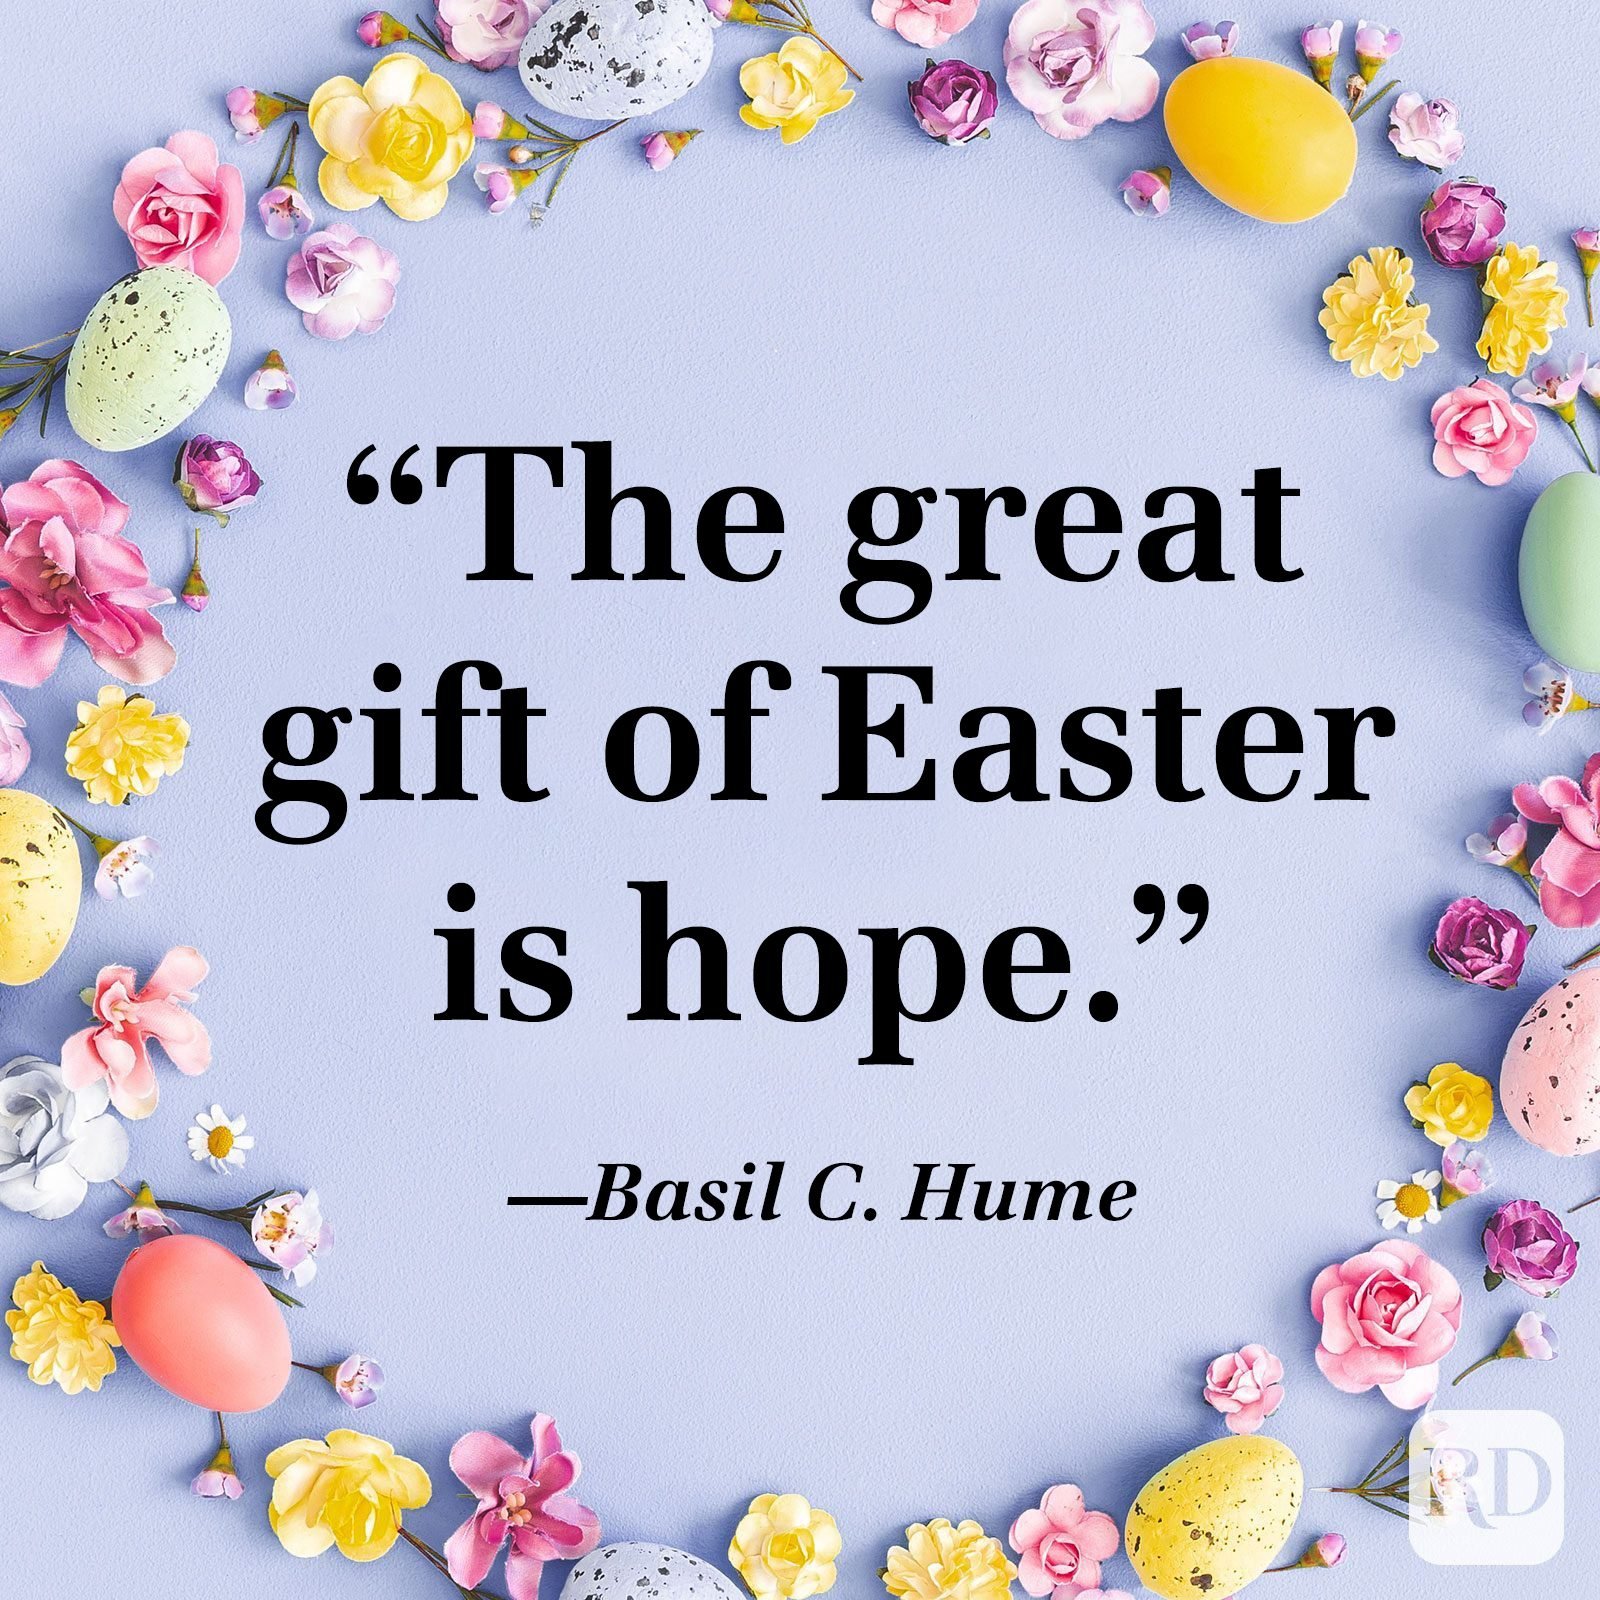 40 Best Easter Quotes to Share in 2022 — Happy Easter Quotes